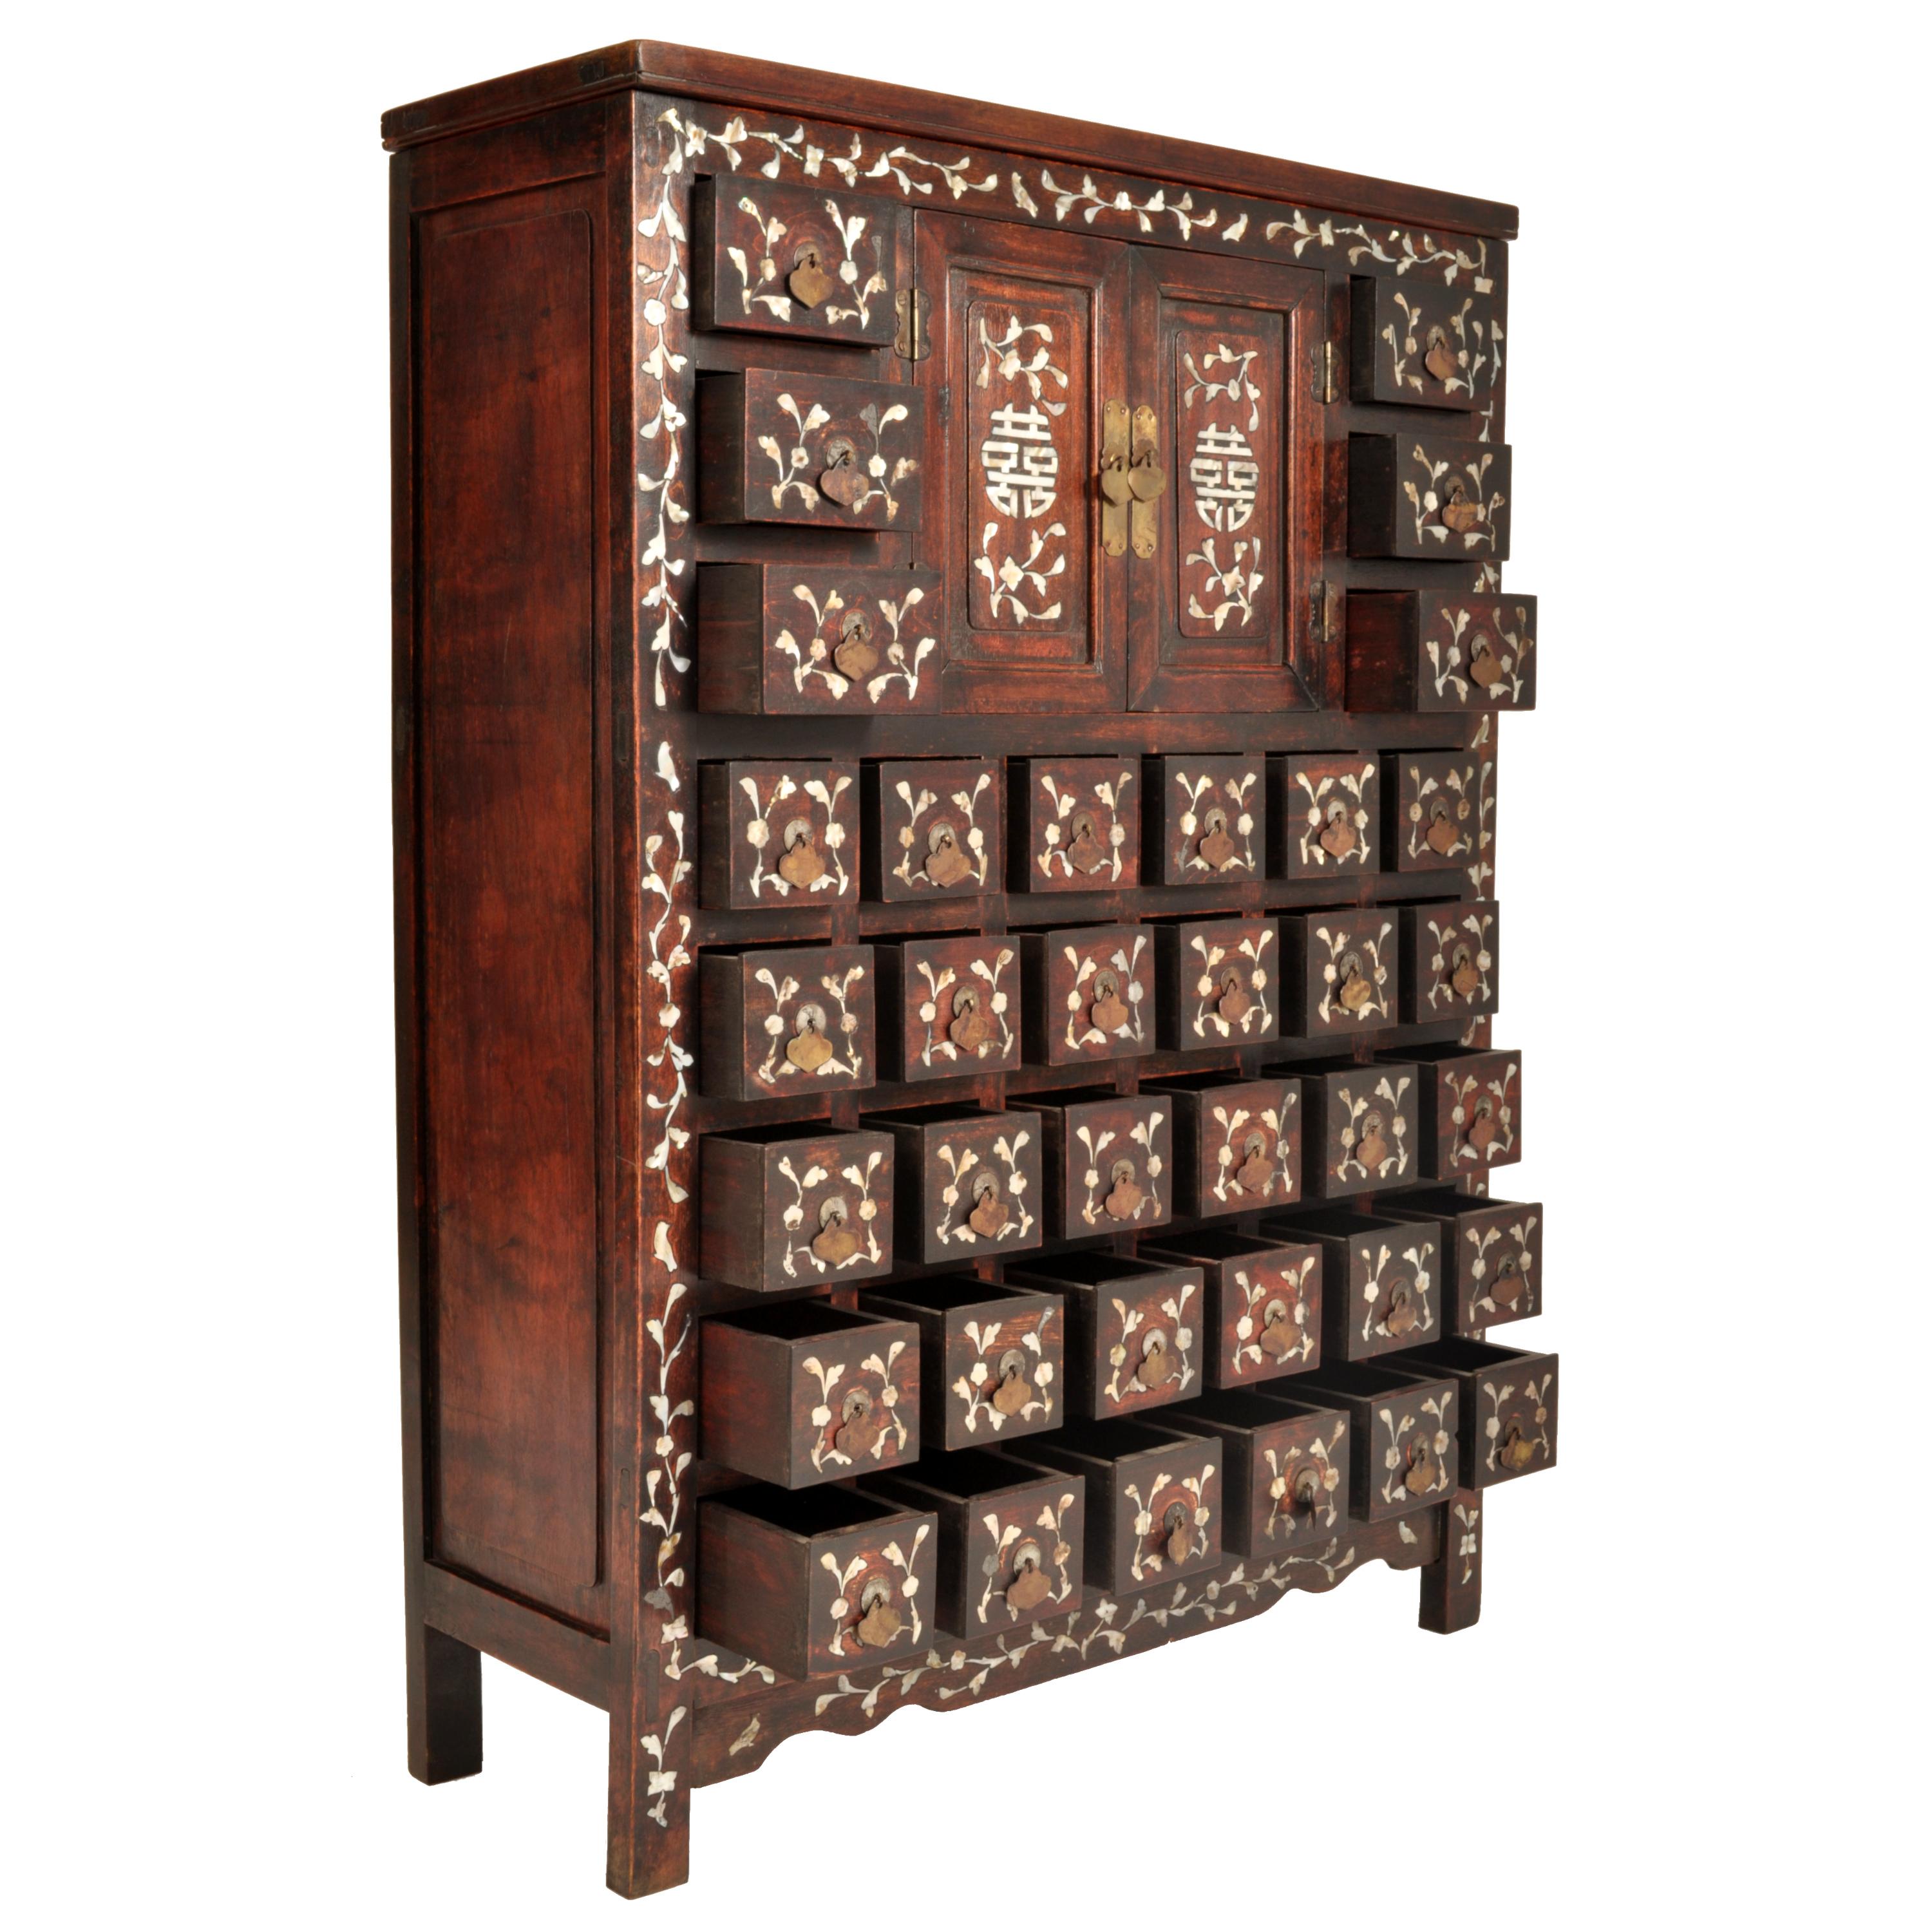 19th Century Antique Chinese Qing Rosewood Mother-of-Pearl Inlaid Apothecary Cabinet 1850